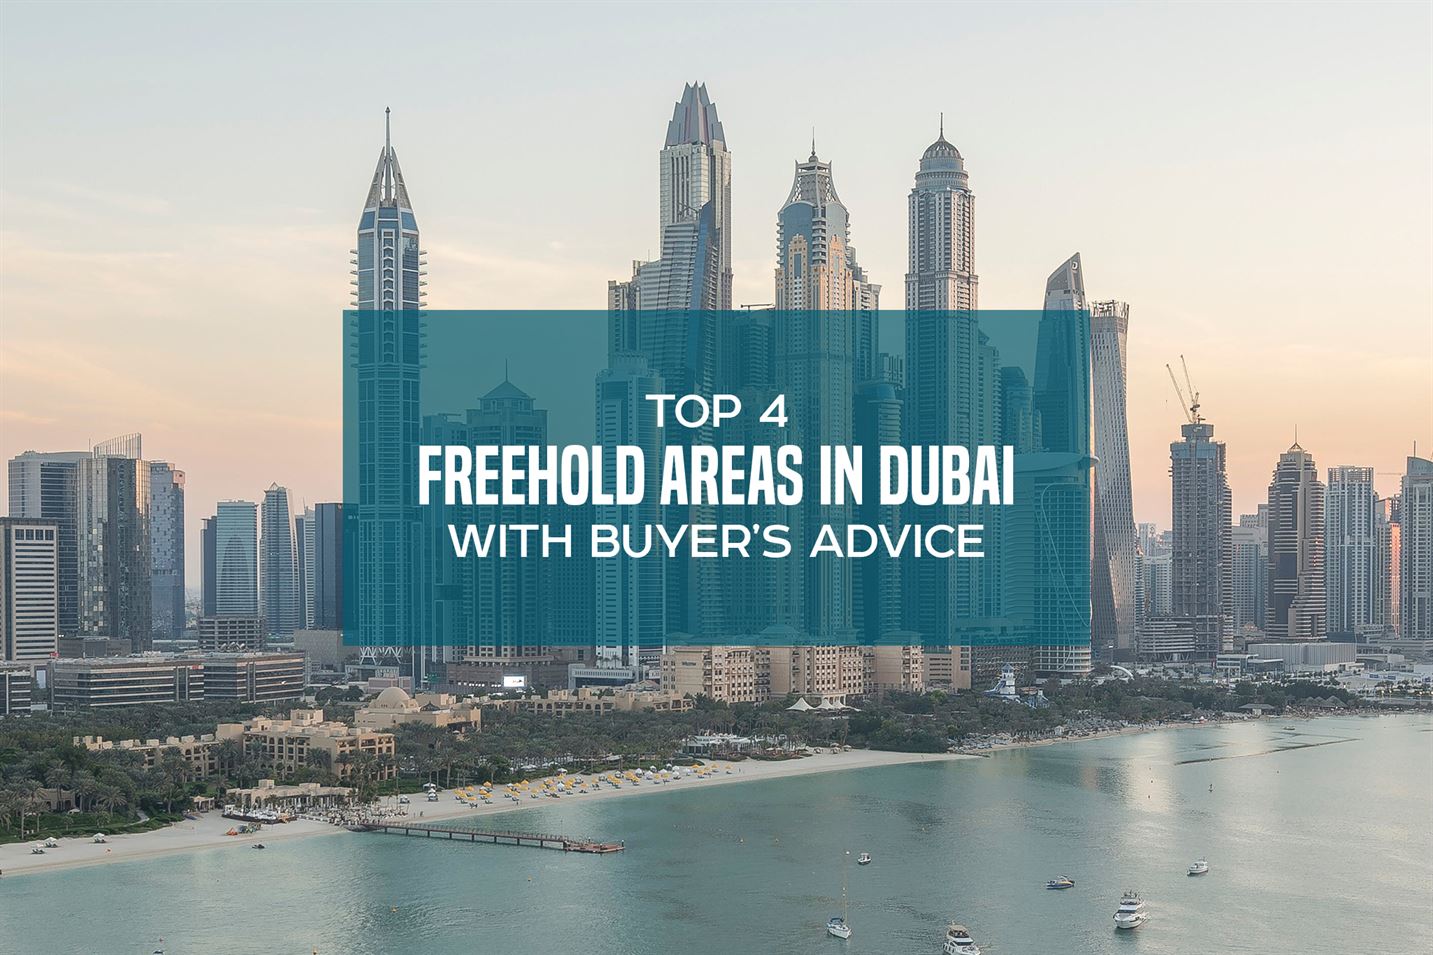 Top four Freehold Areas in Dubai with Buyer's Advice